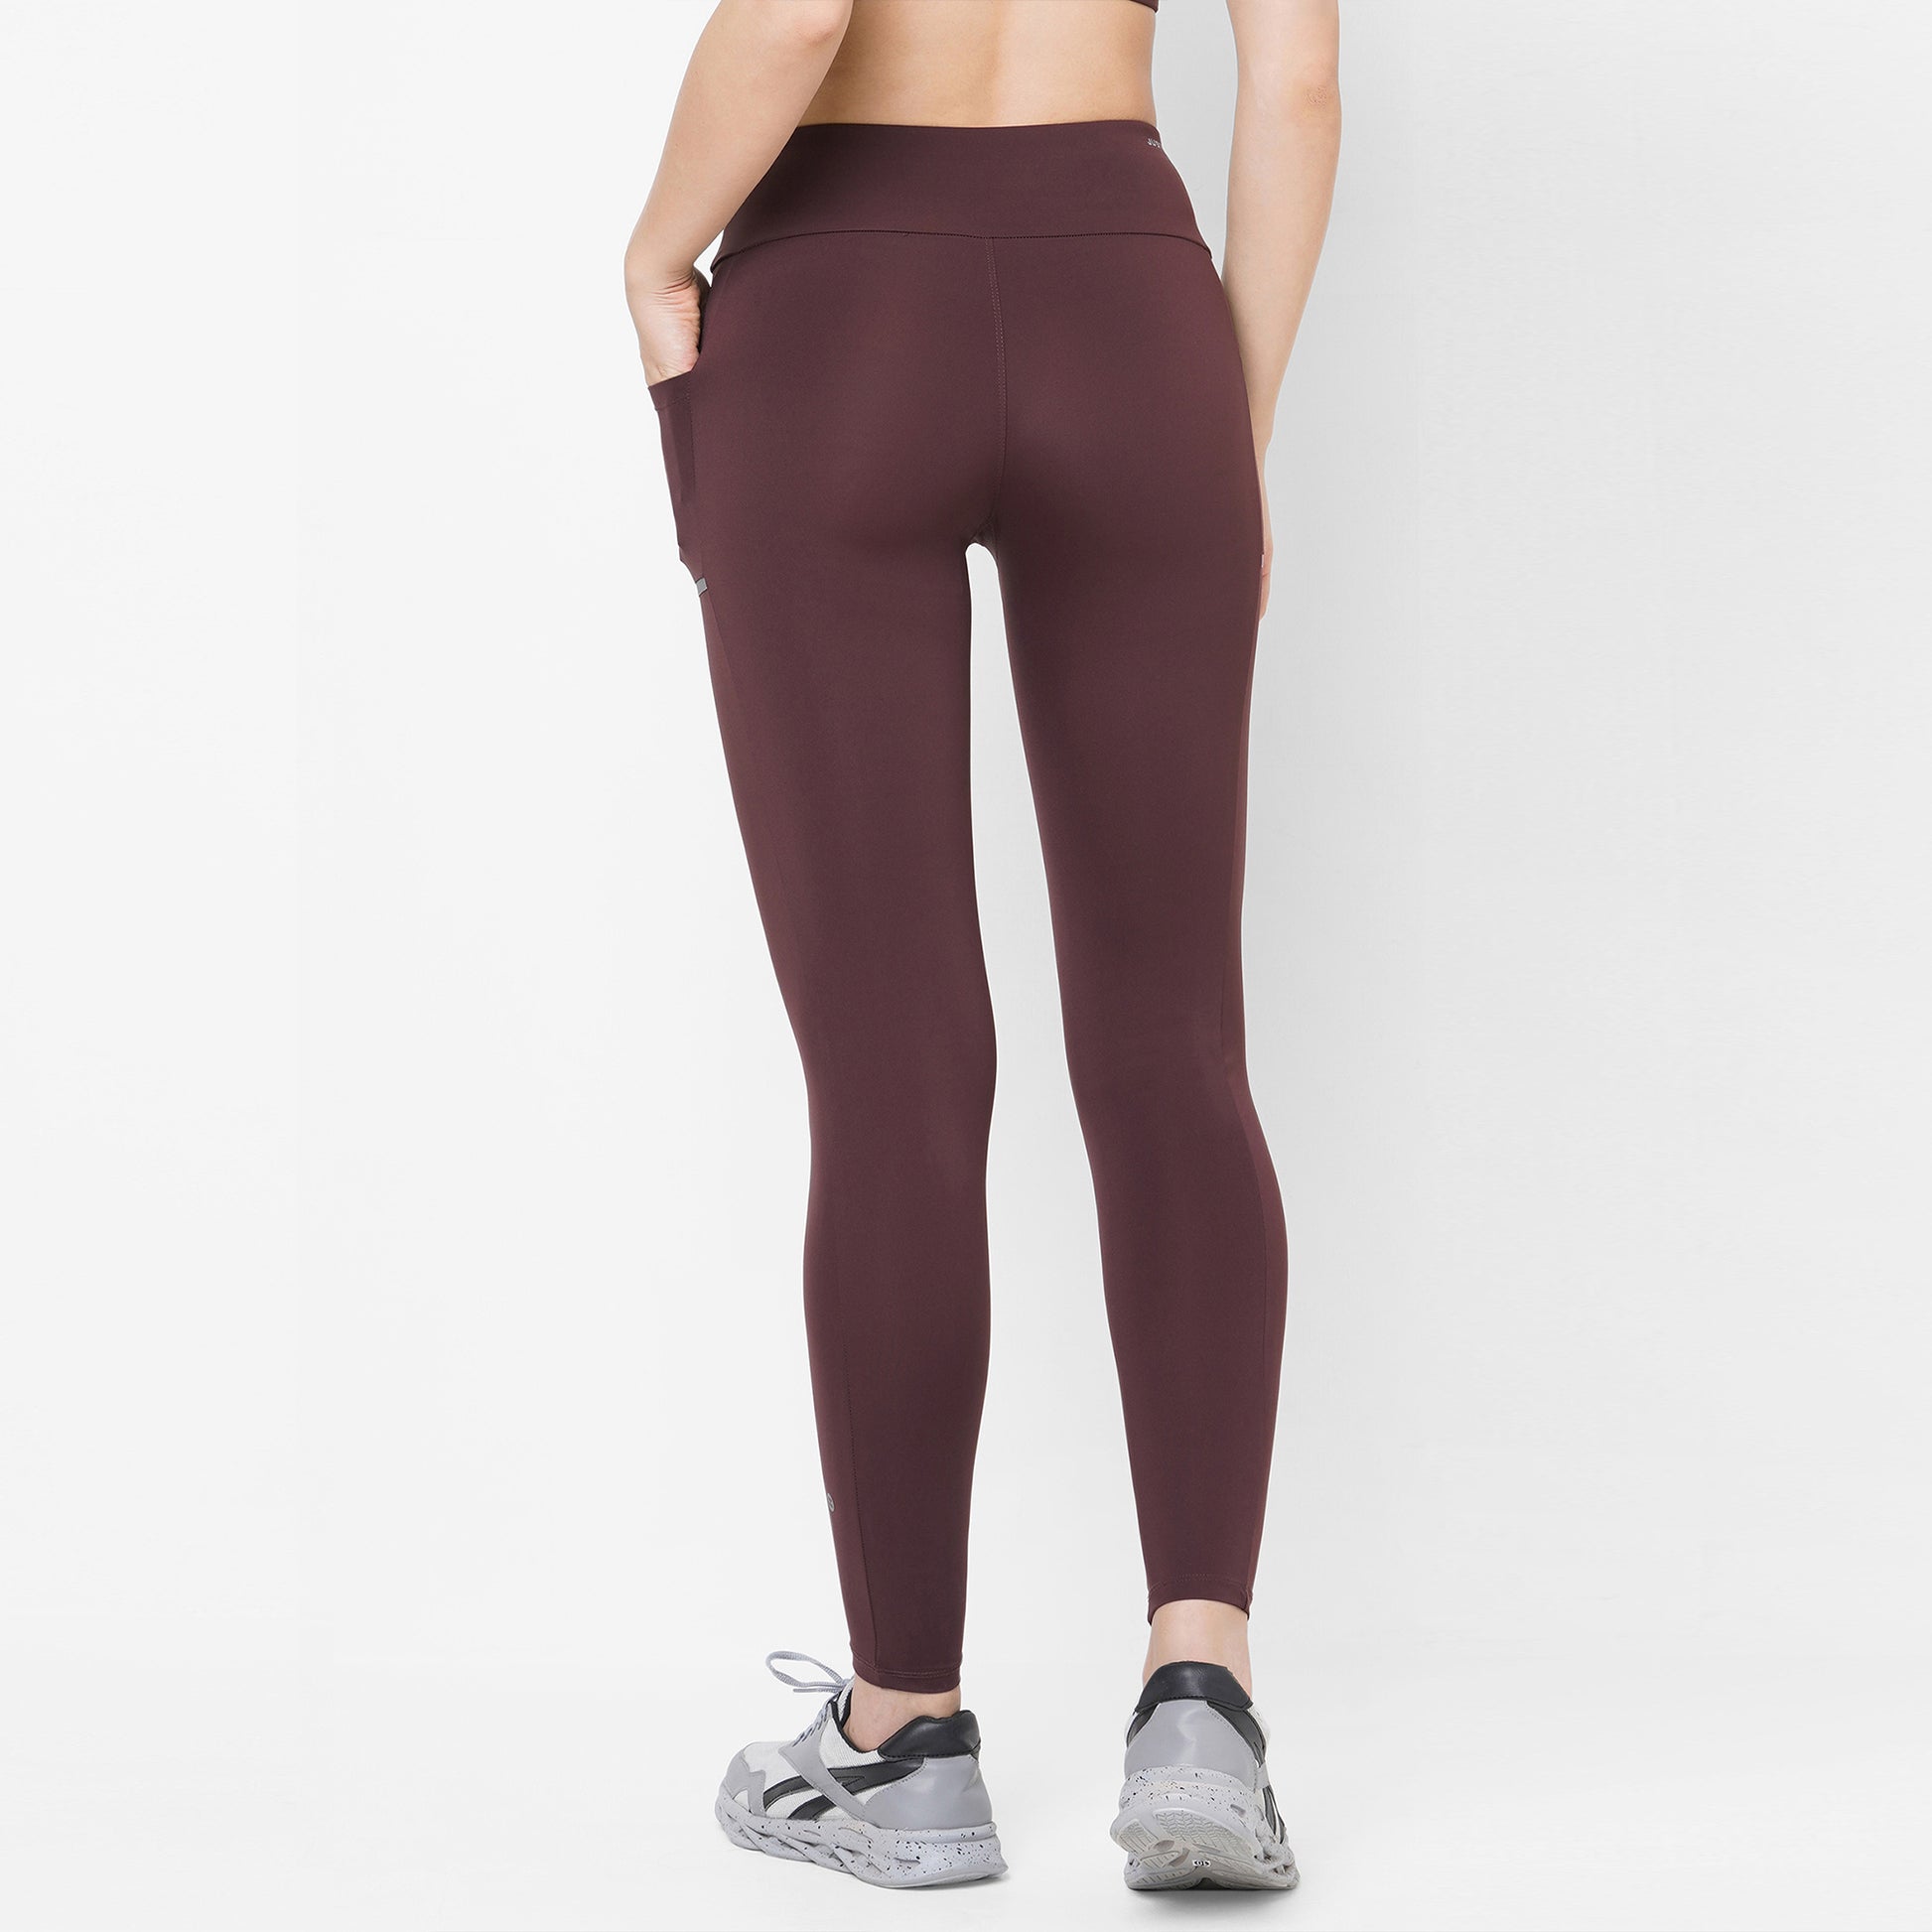 Laasa Sports  Chocolate Brown JUST-DRY Workout Pants for Women